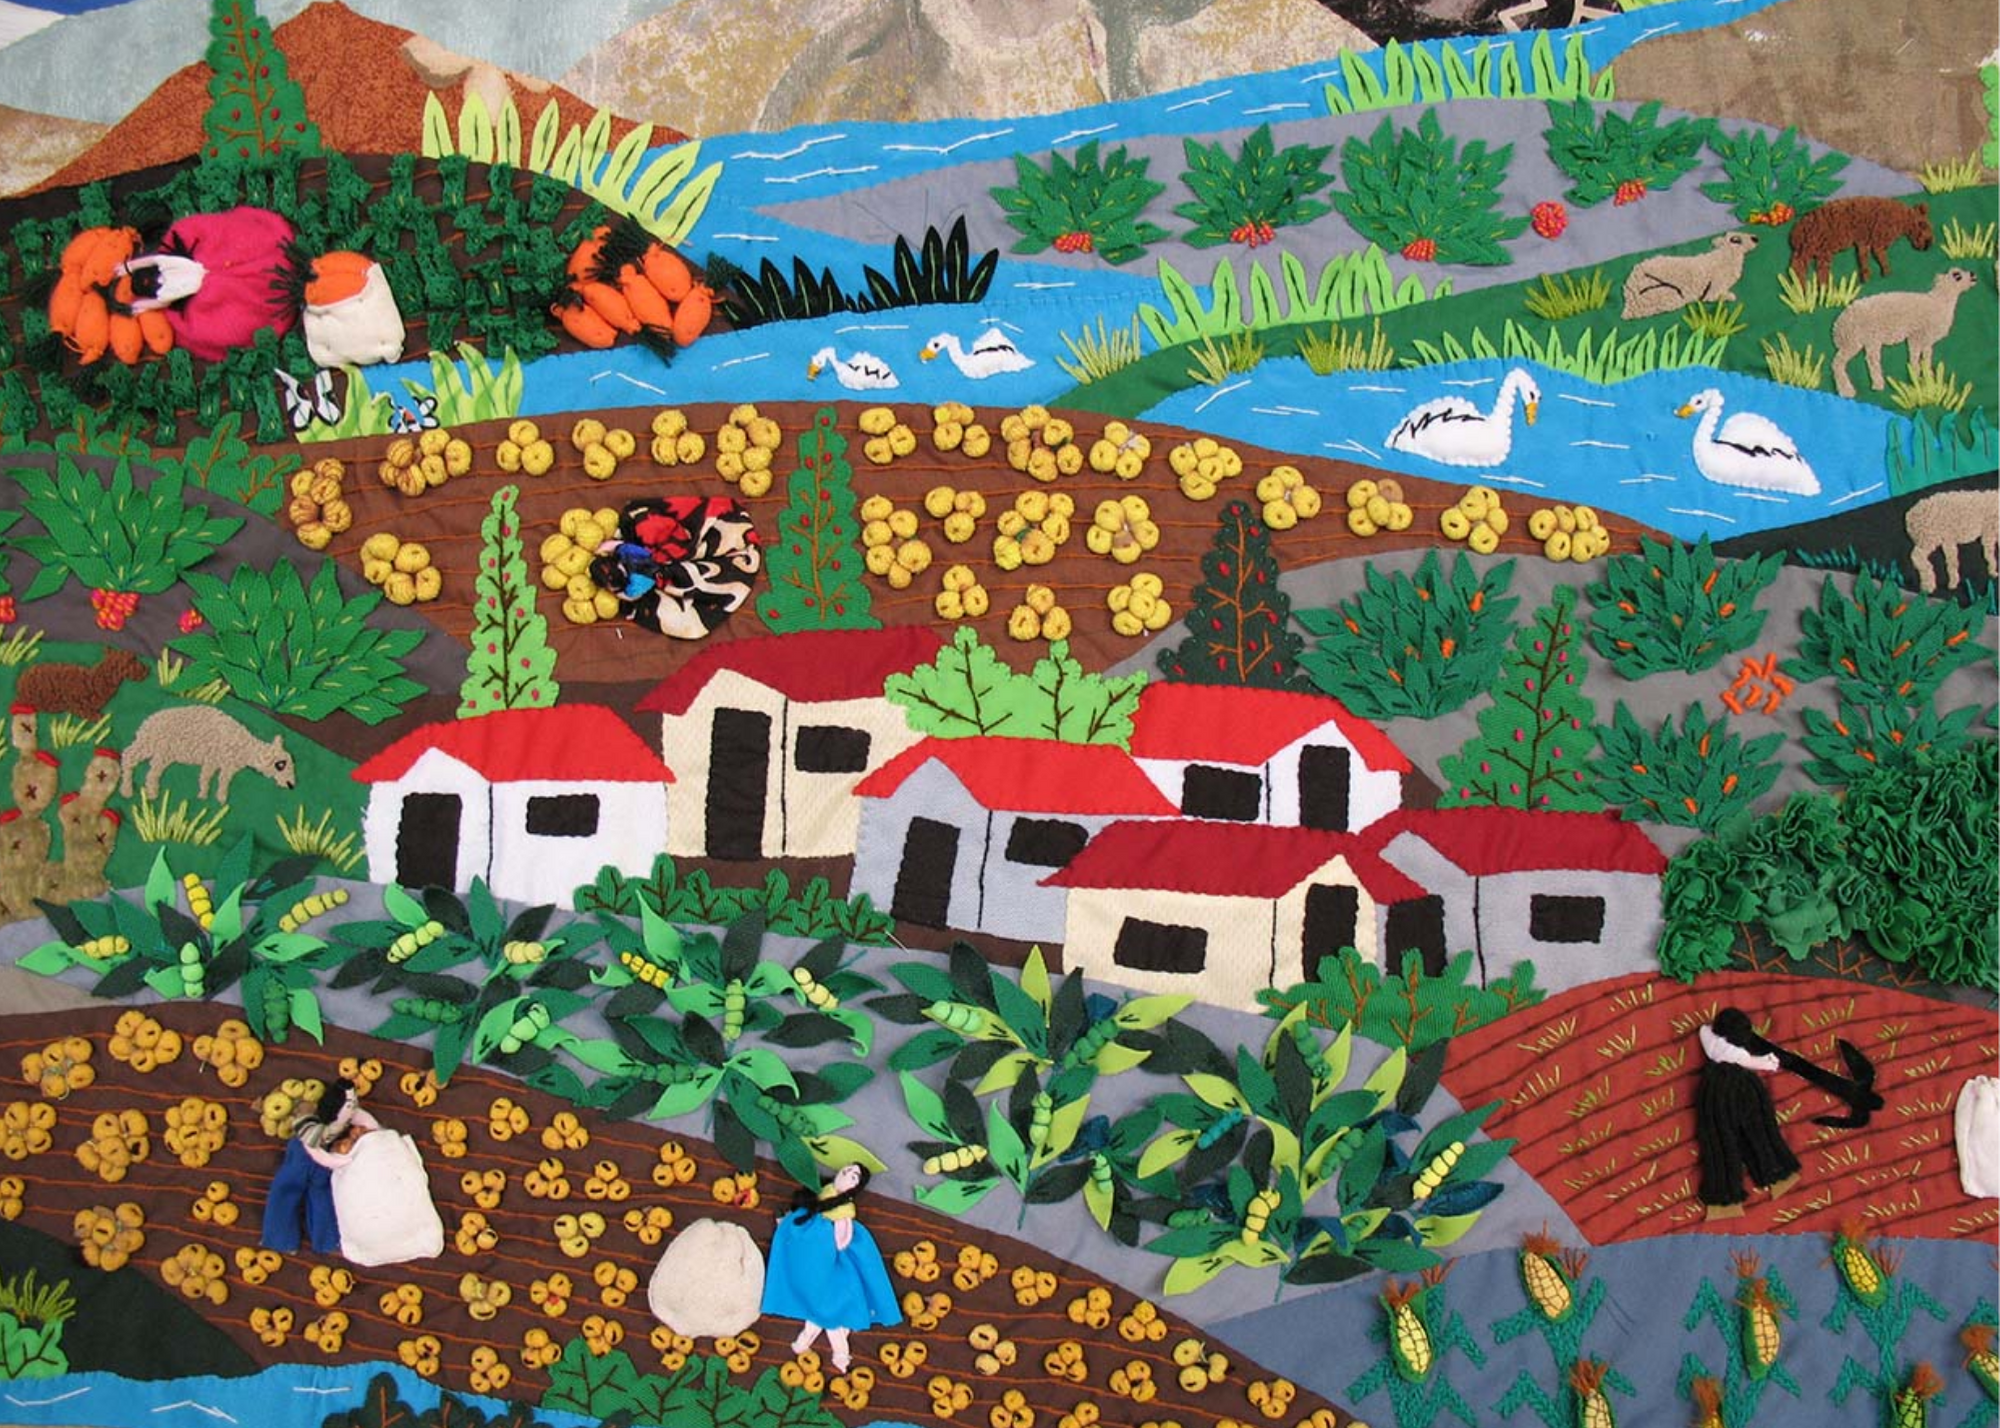 A painting of a farm